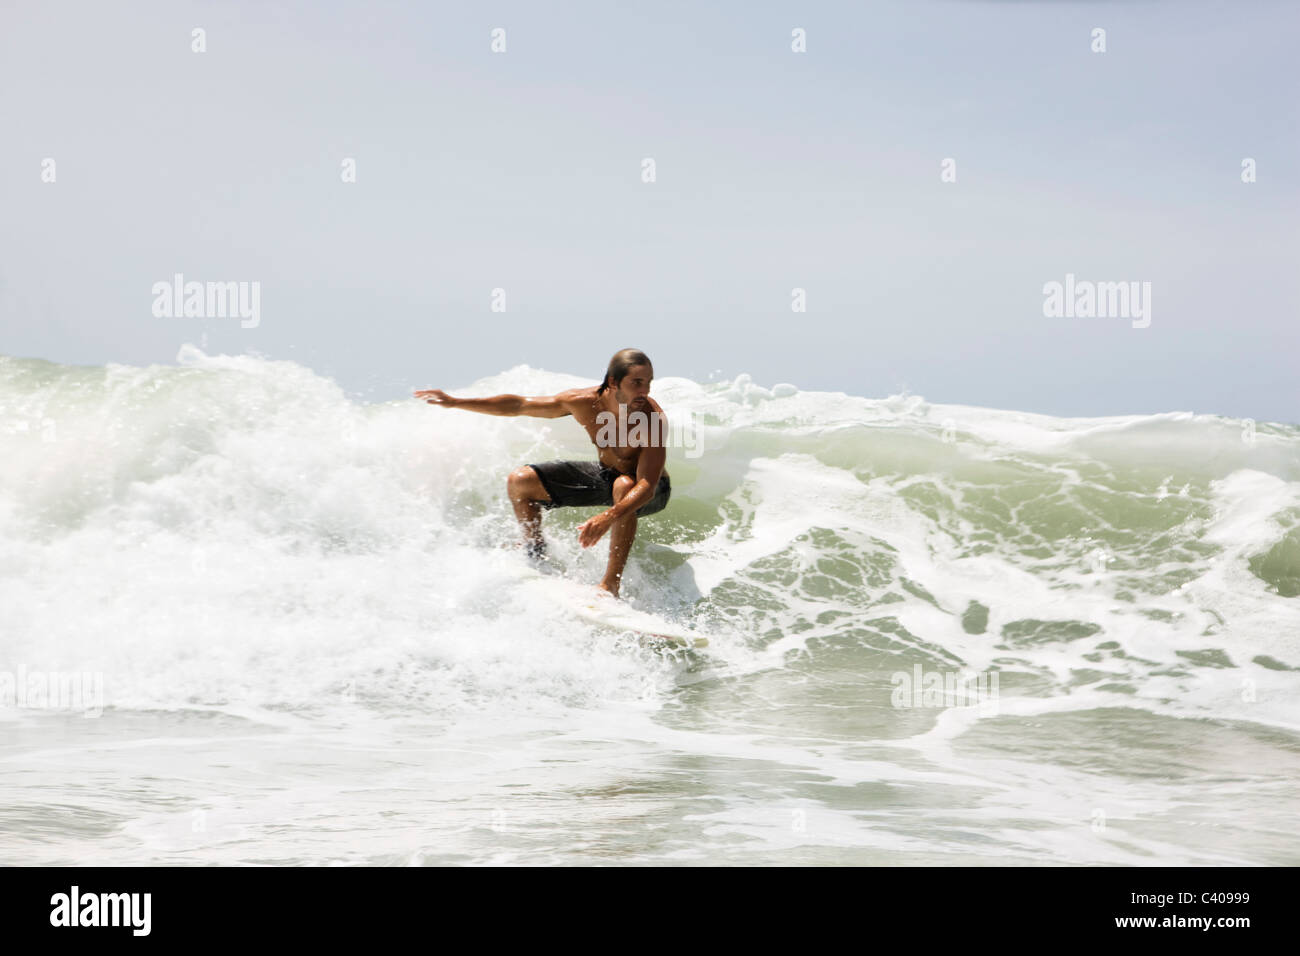 Guy surfing on wave Stock Photo